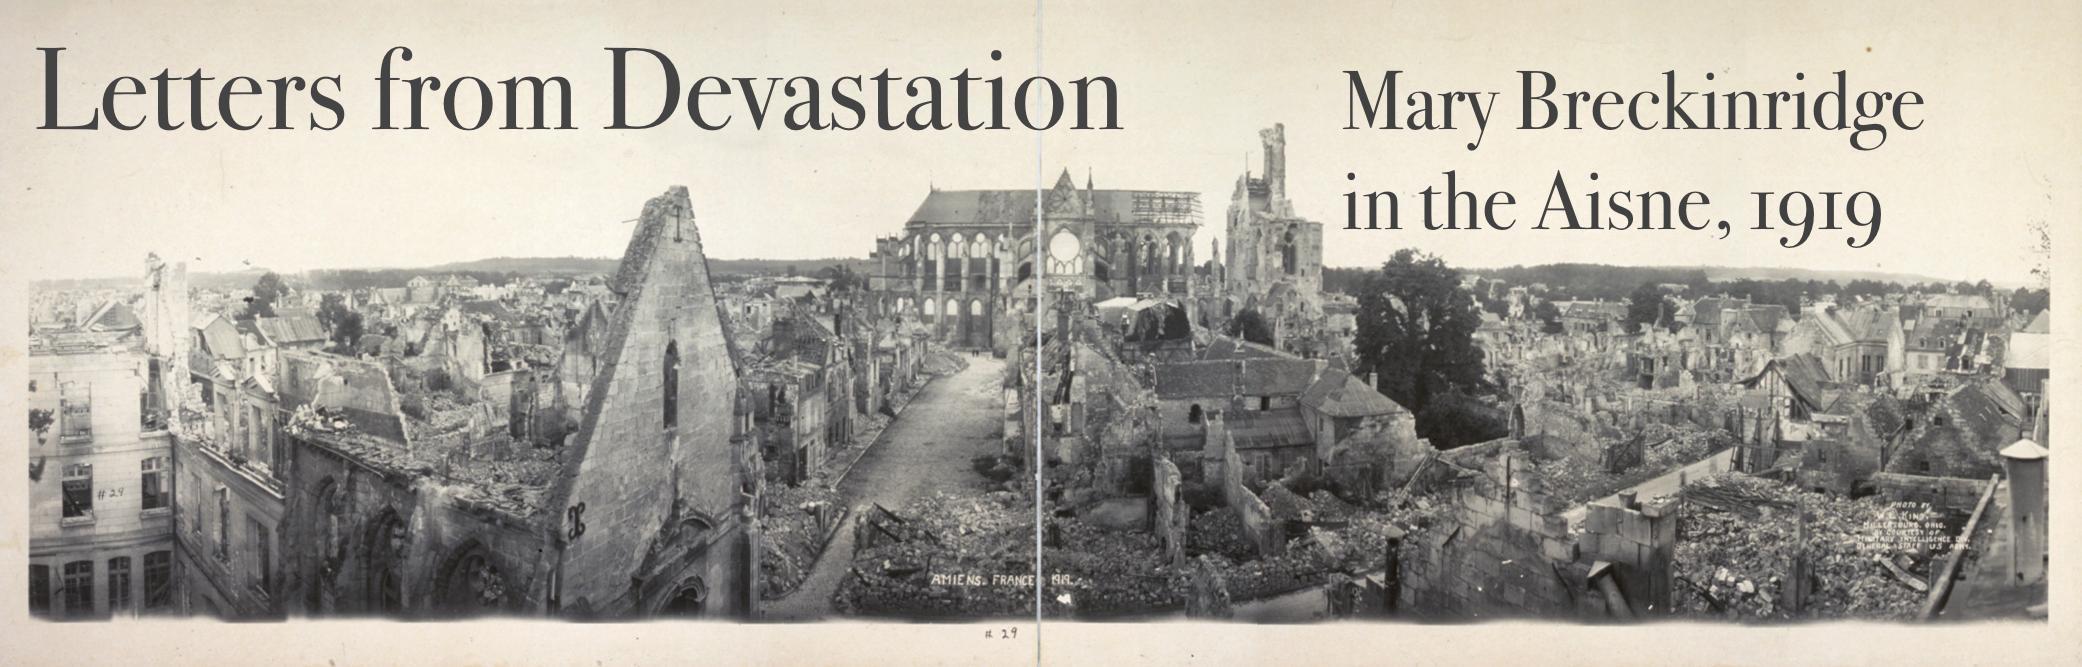 panoramic view of Soissons in 1919 with ruined buildings after world war one